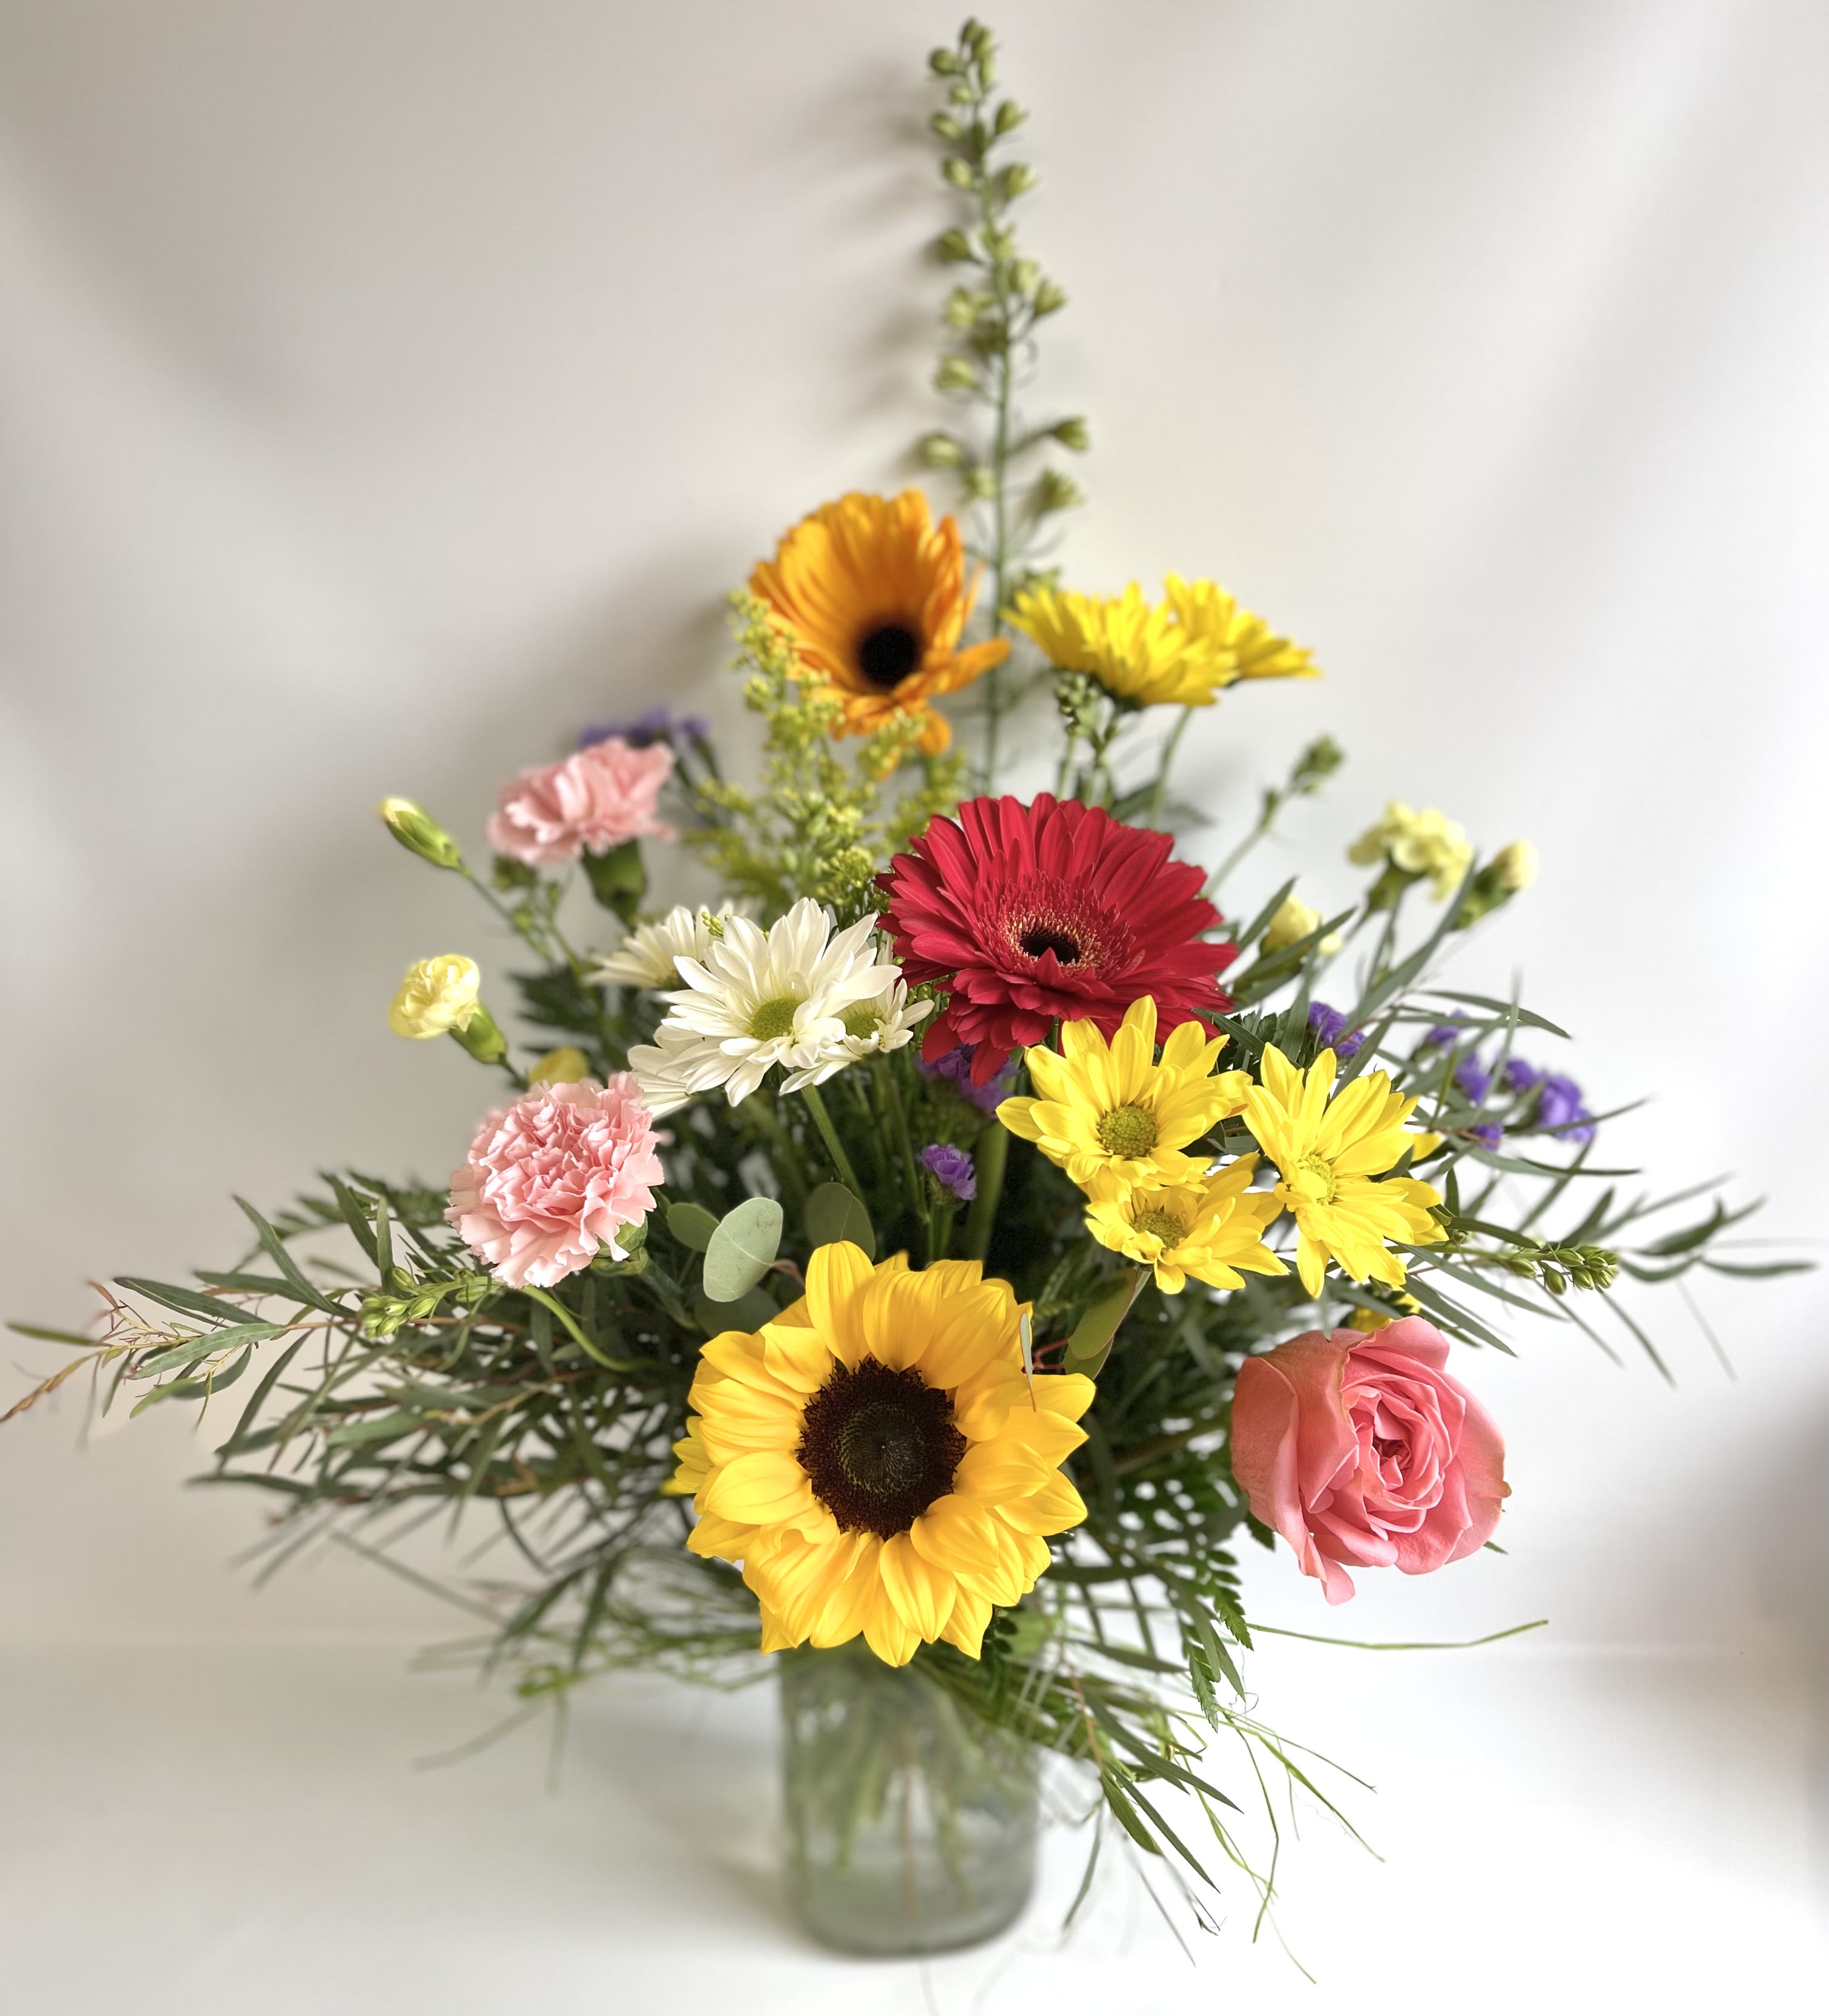 Garden Delight  by Barb’s Flowers - This bouquet is full of color. Sunflowers, Gerbera Daisy, Carnations, Daisies and Garden Rose. 